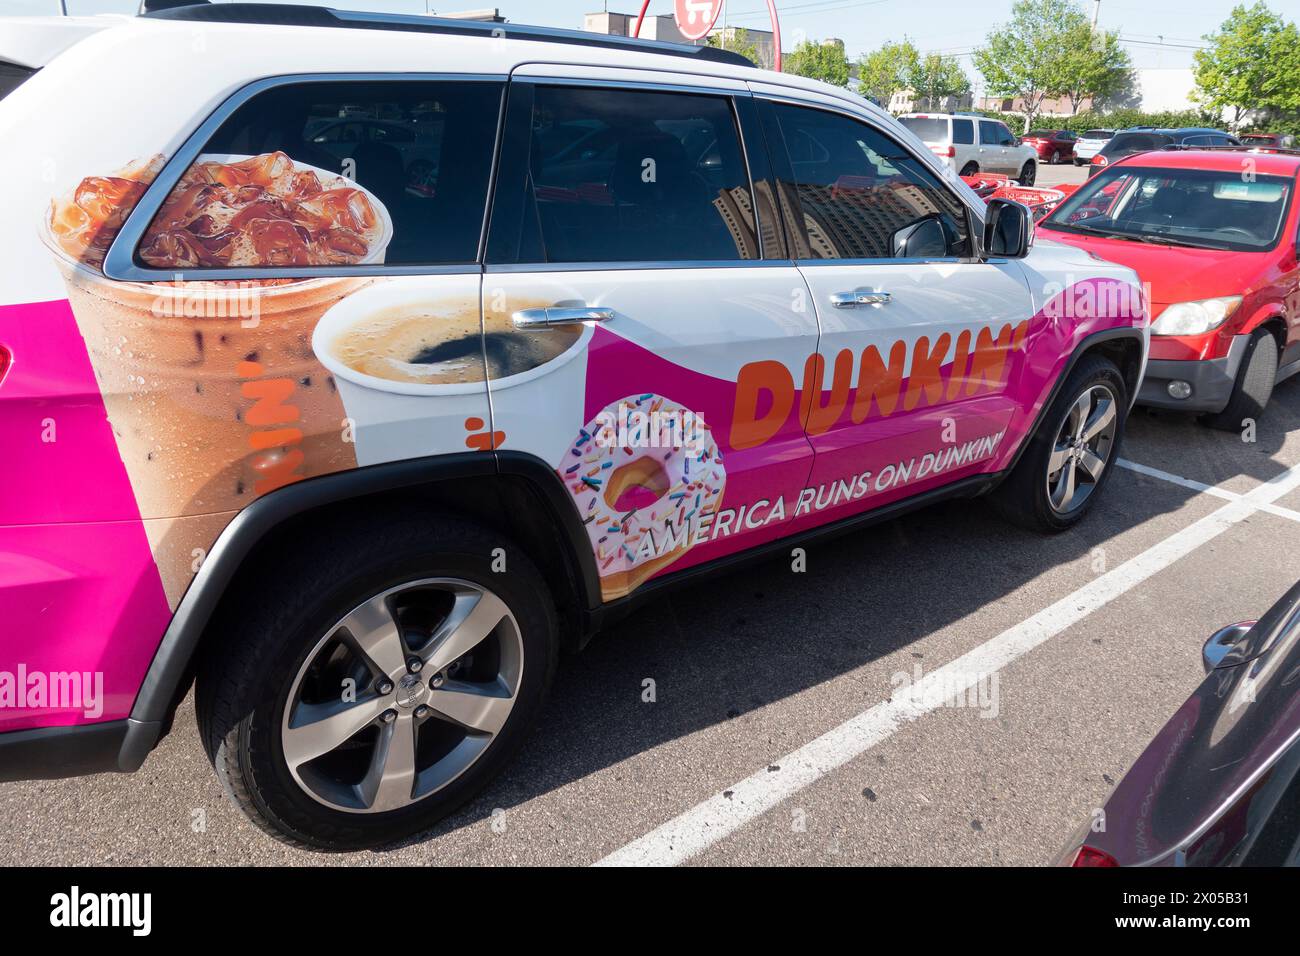 Dunkin Donuts limousine in the Target parking lot picking up supplies. St Paul Minnesota MN USA Stock Photo